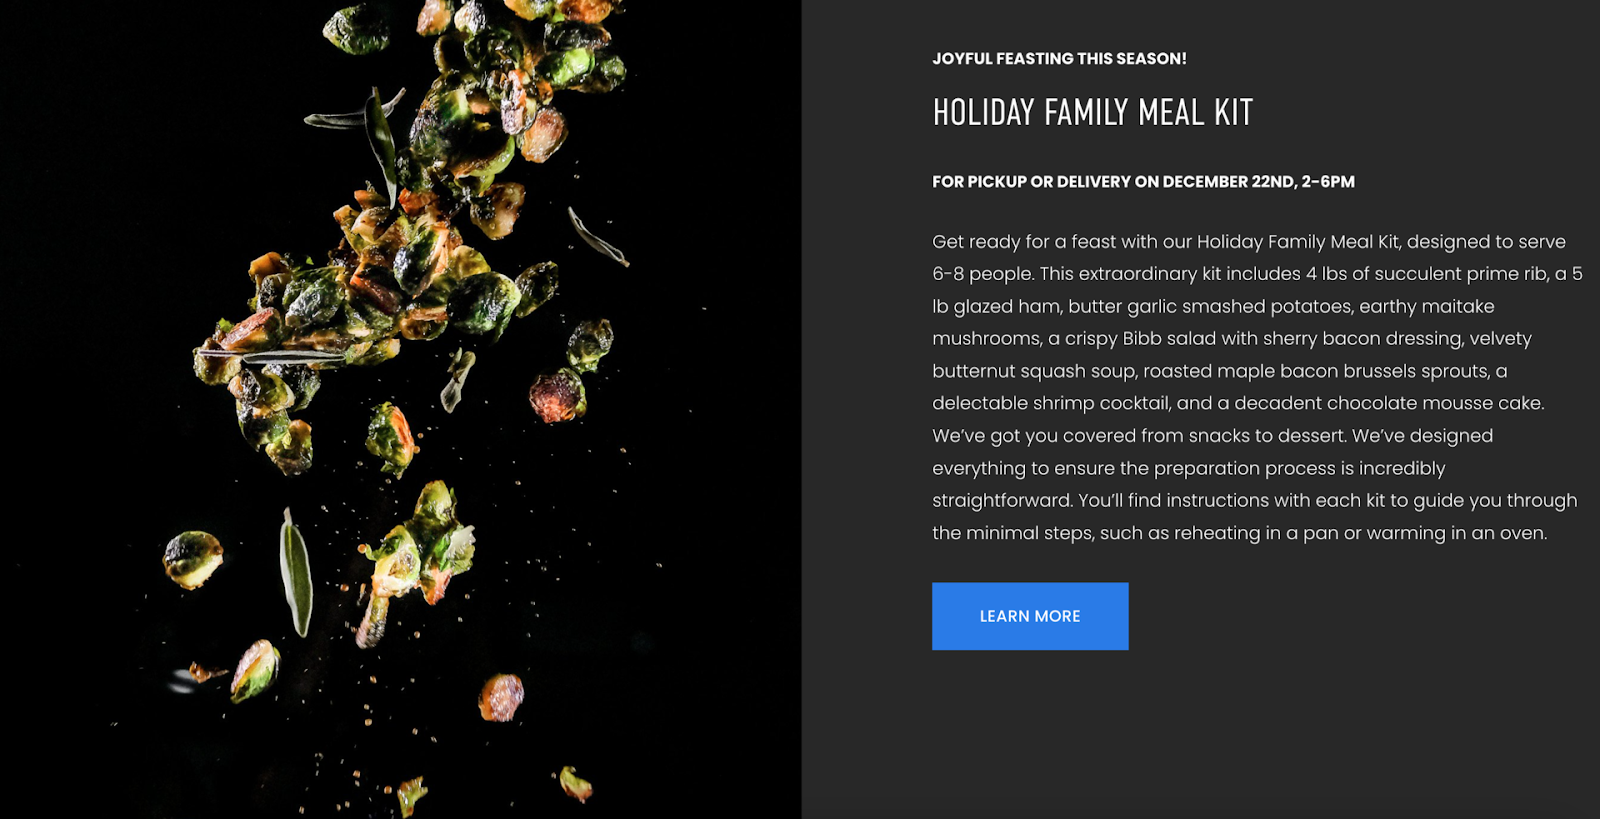 Travail restaurant seasonal promotion for holiday meal kits